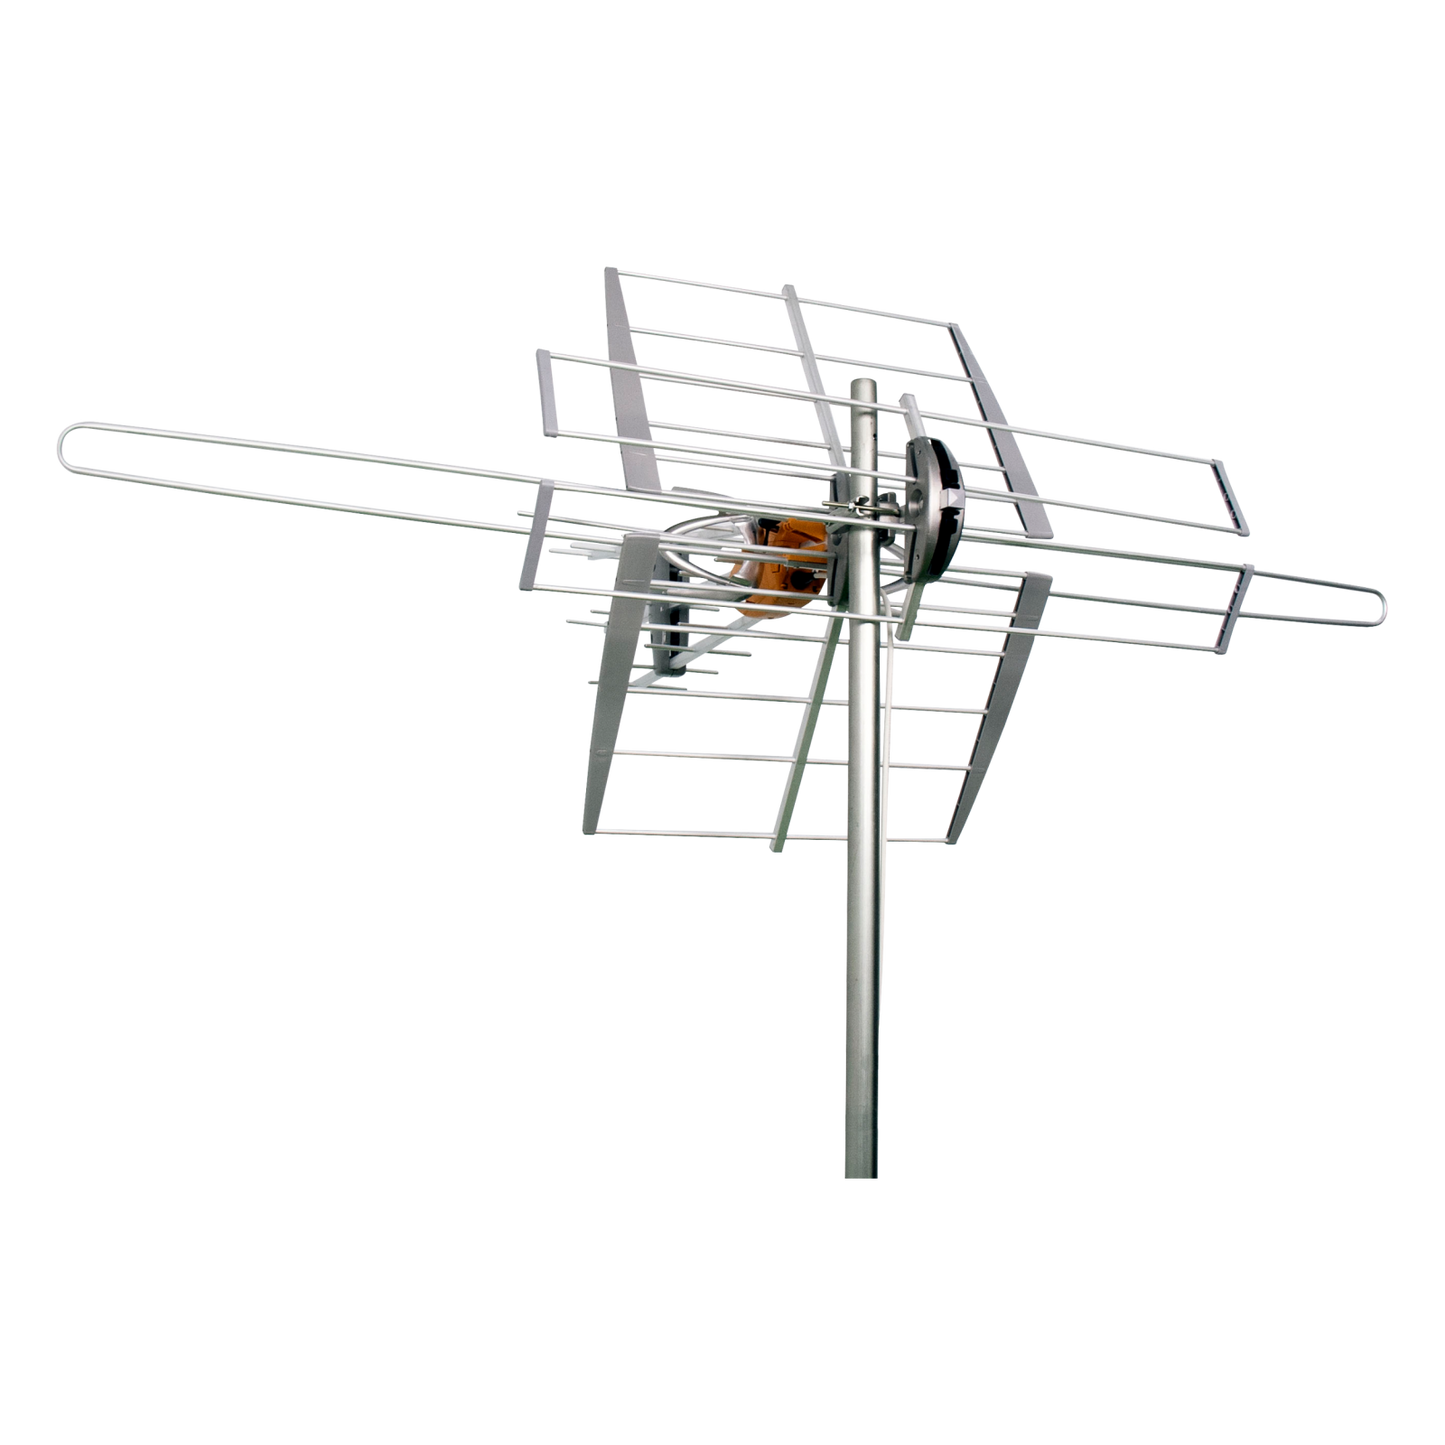 Televes 148281, DAT BOSS MIX TV Antenna with W/Preamp, LO-VHF/HI-VHF/UHF